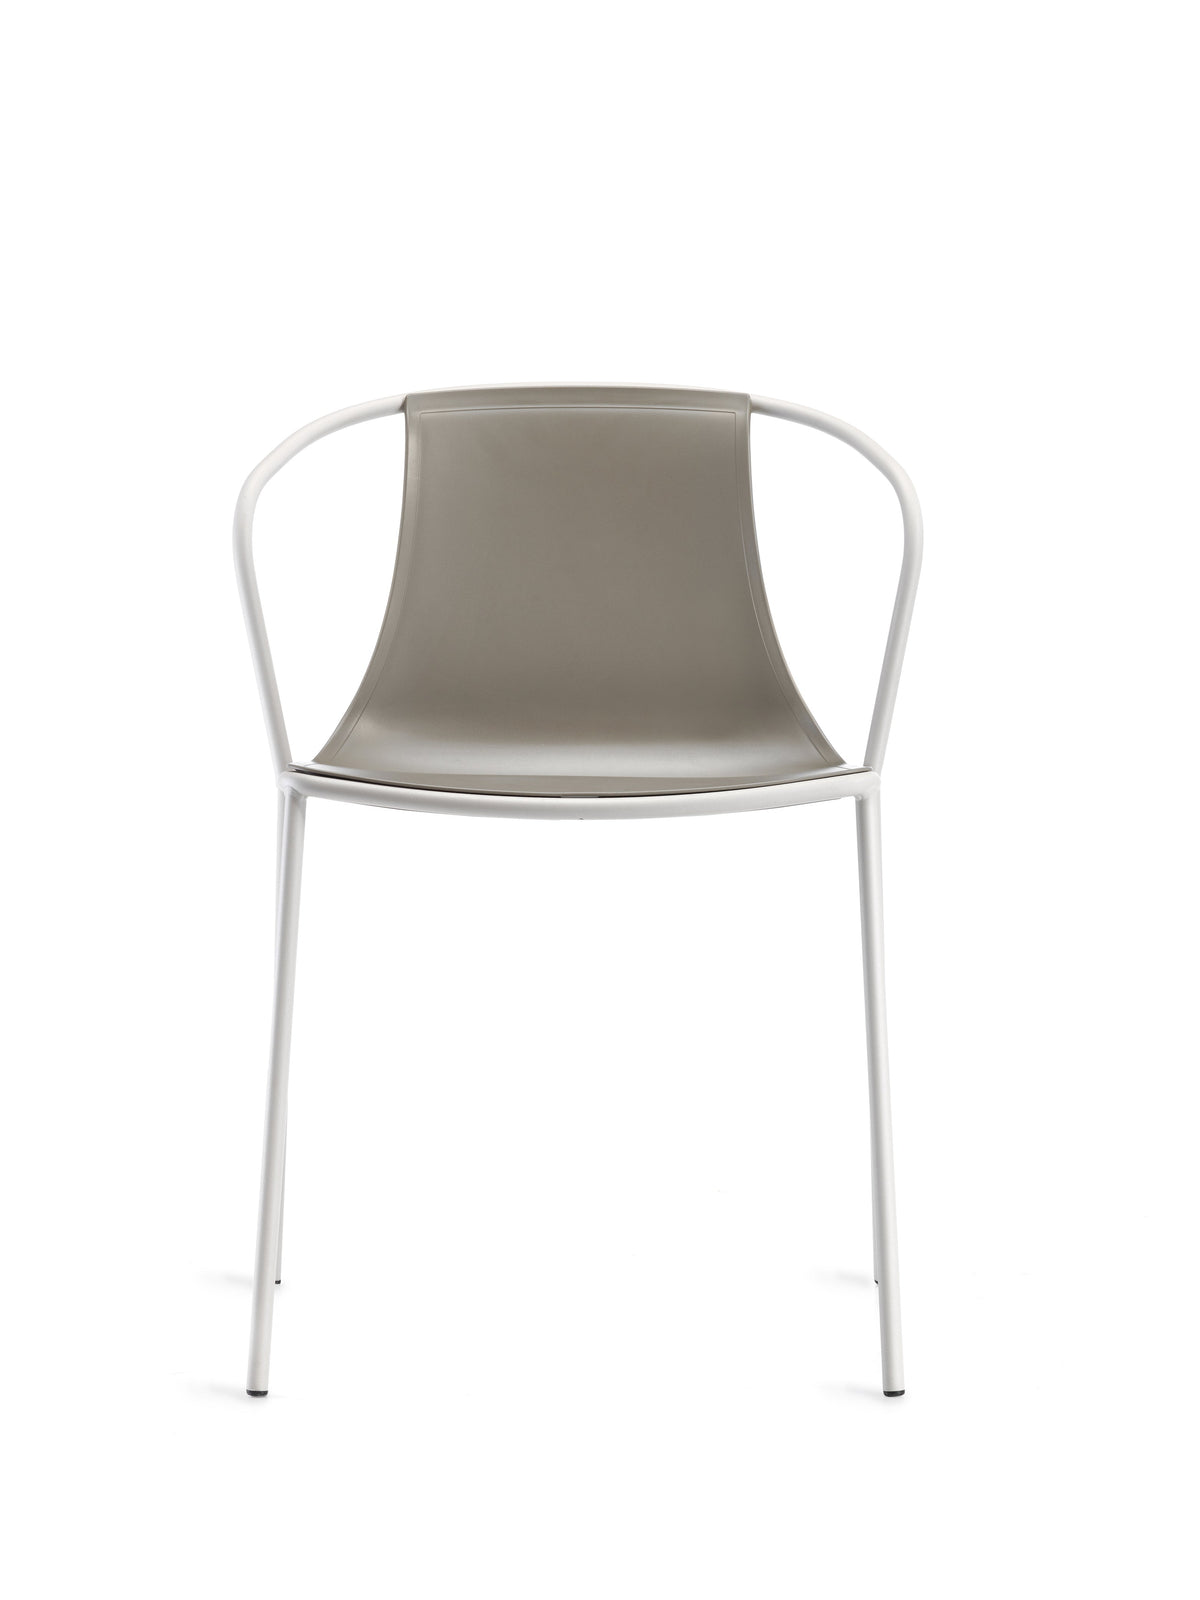 Kasia Side Chair-Gaber-Contract Furniture Store